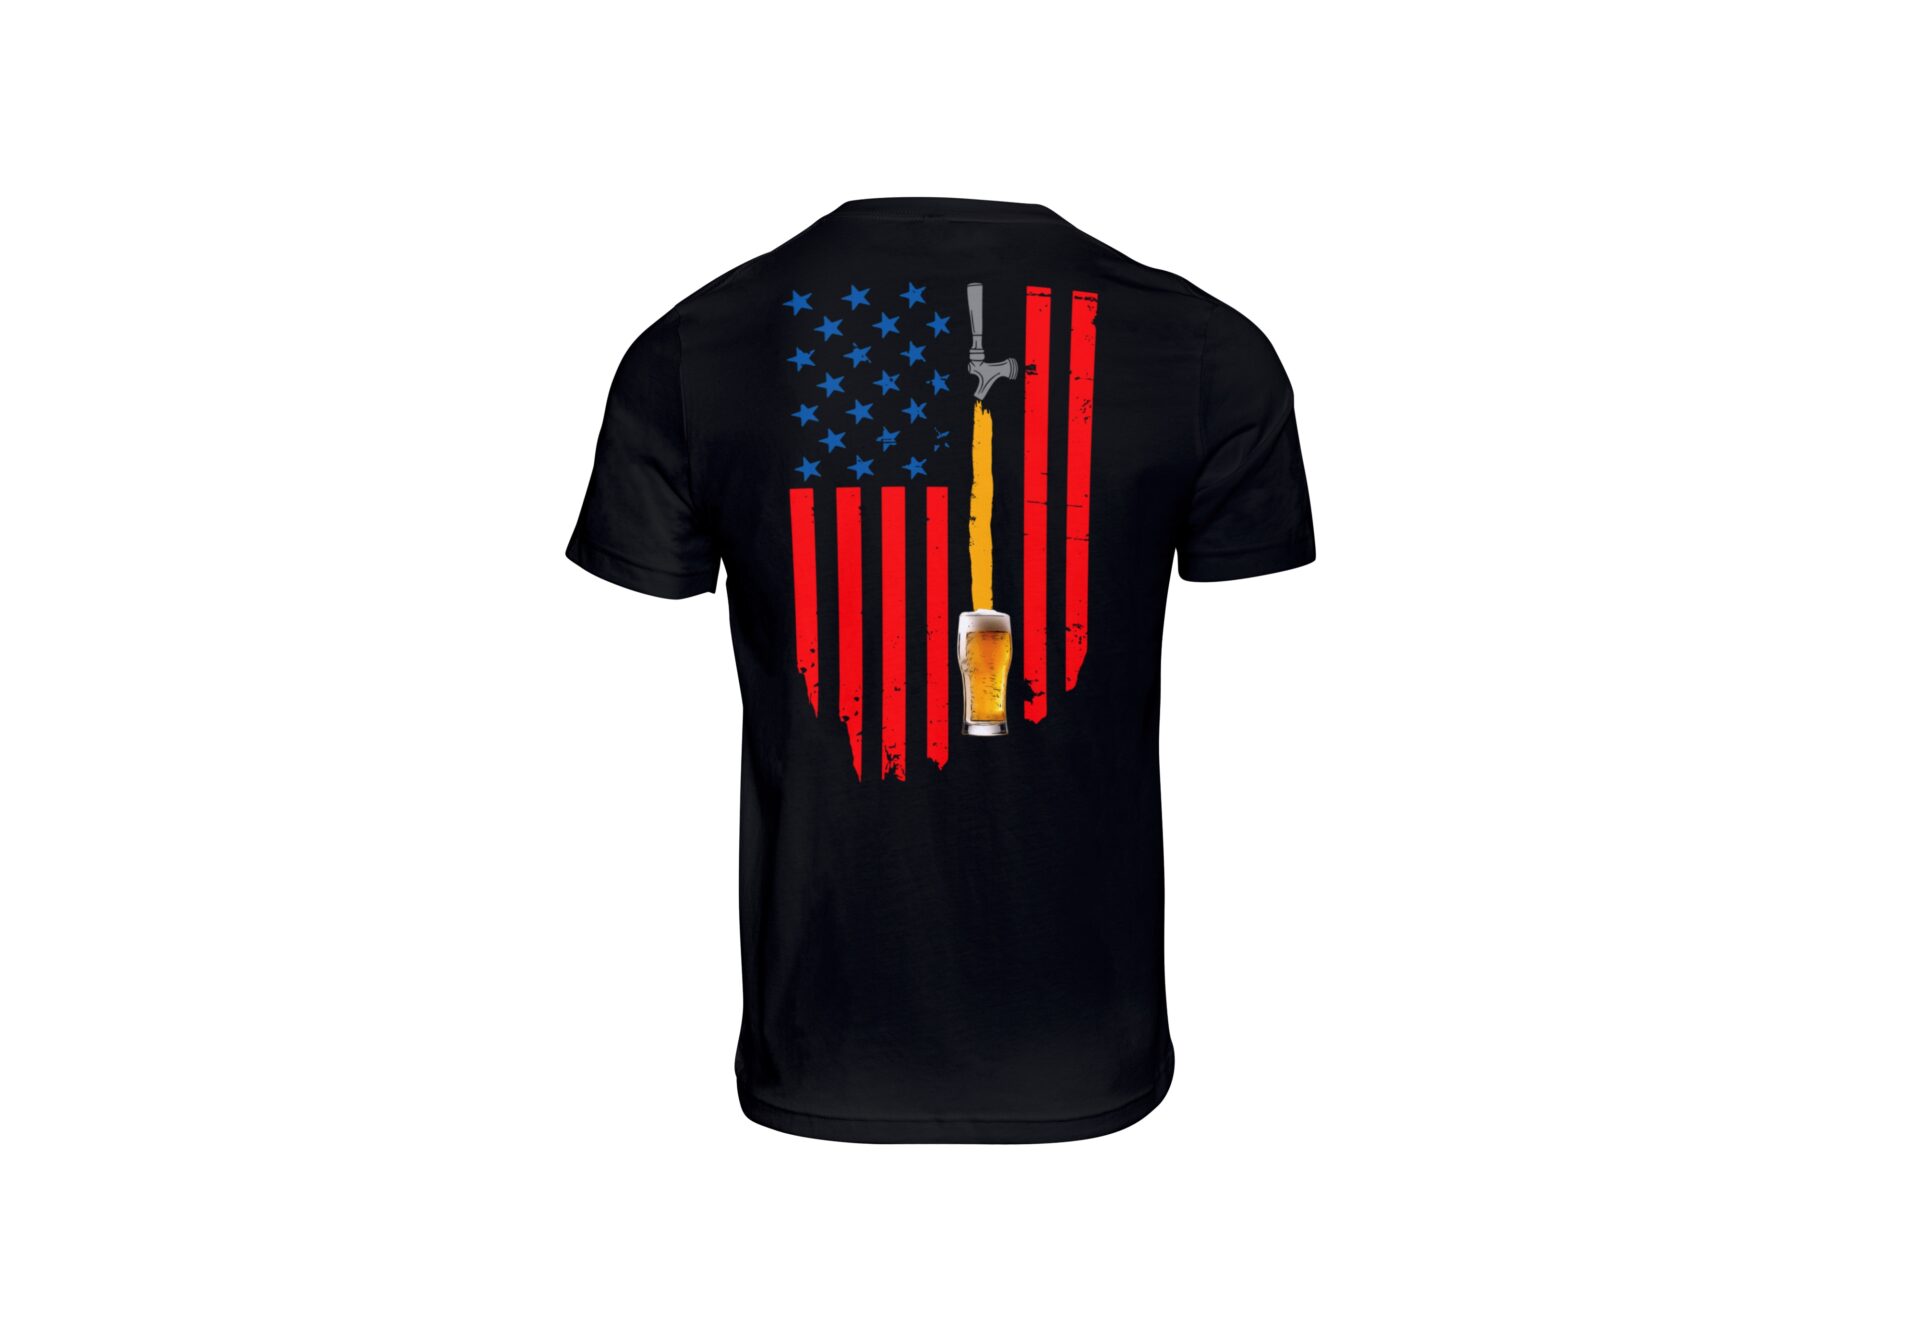 Comfort Colors C1717 unisex adult t-shirt in black with the saying “Red, White, and Brew” on the front (not pictures). The back features a distressed American flag and a beer tap pouring into a class